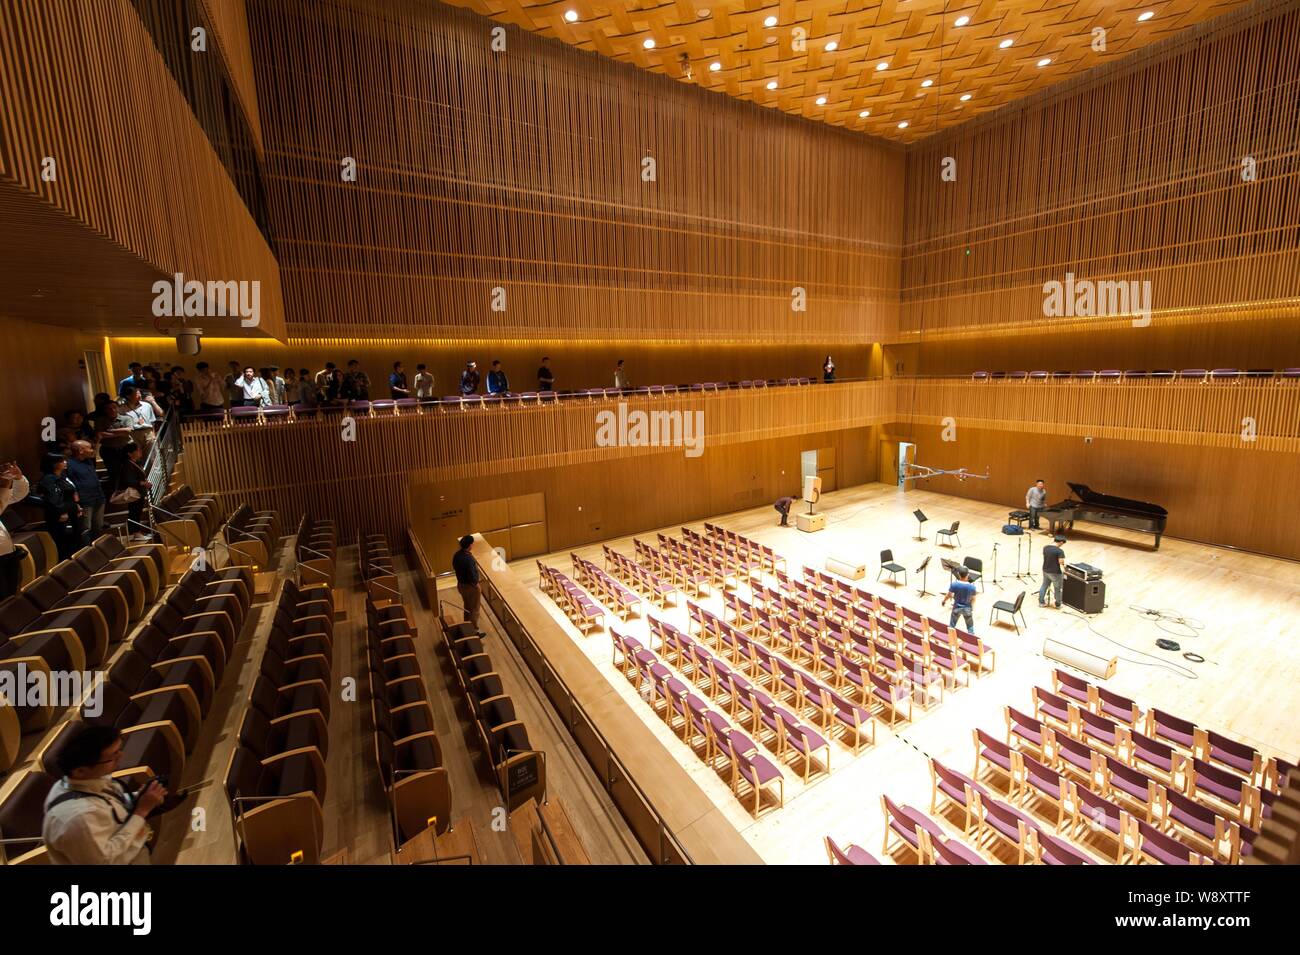 Interior view of a concert hall of the Shanghai Symphony Orchestra Hall designed by Japanese architect Arata Isozaki in Shanghai, China, 10 October 20 Stock Photo